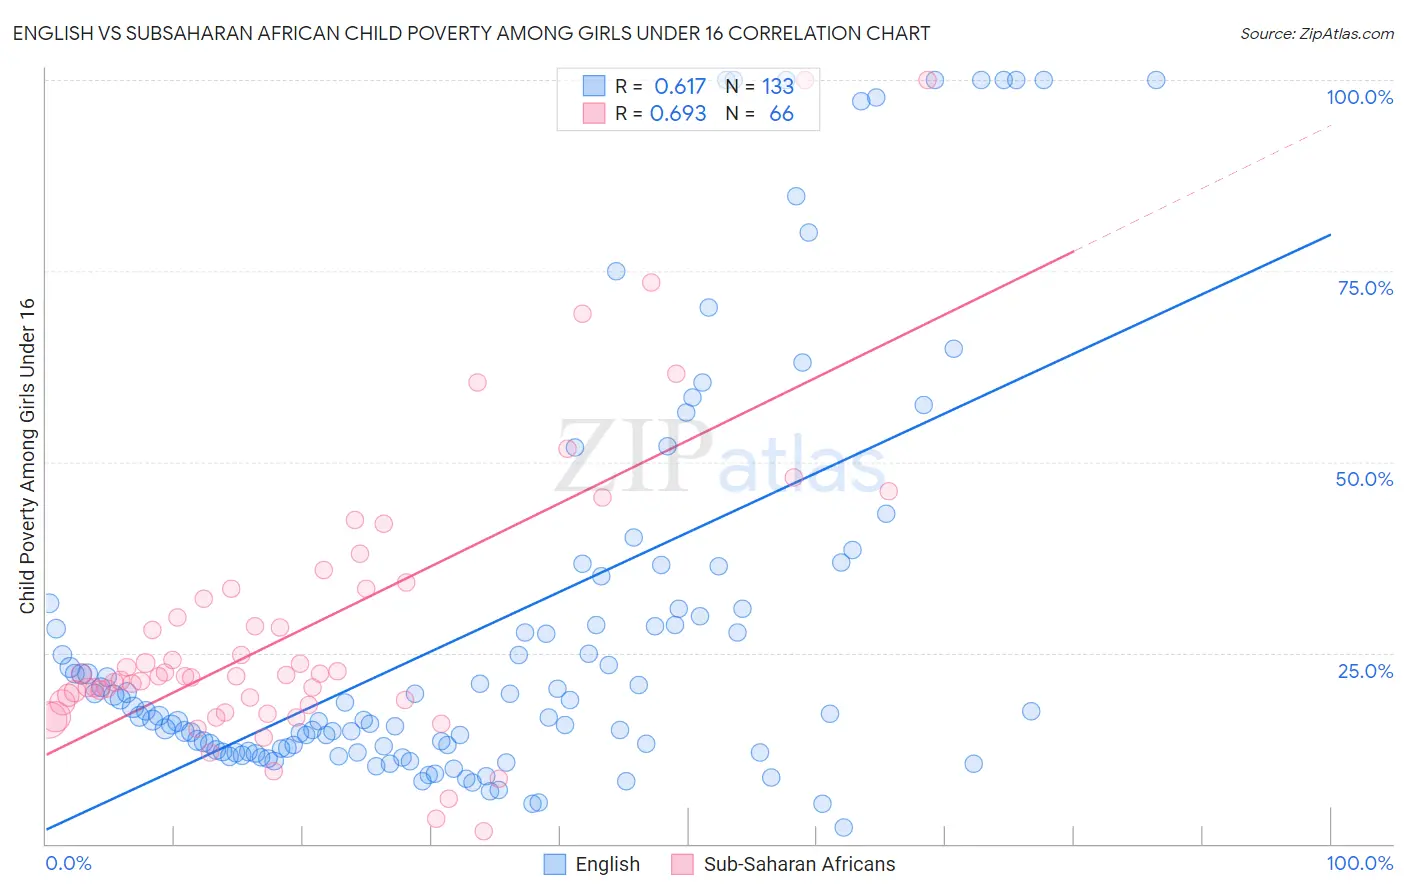 English vs Subsaharan African Child Poverty Among Girls Under 16